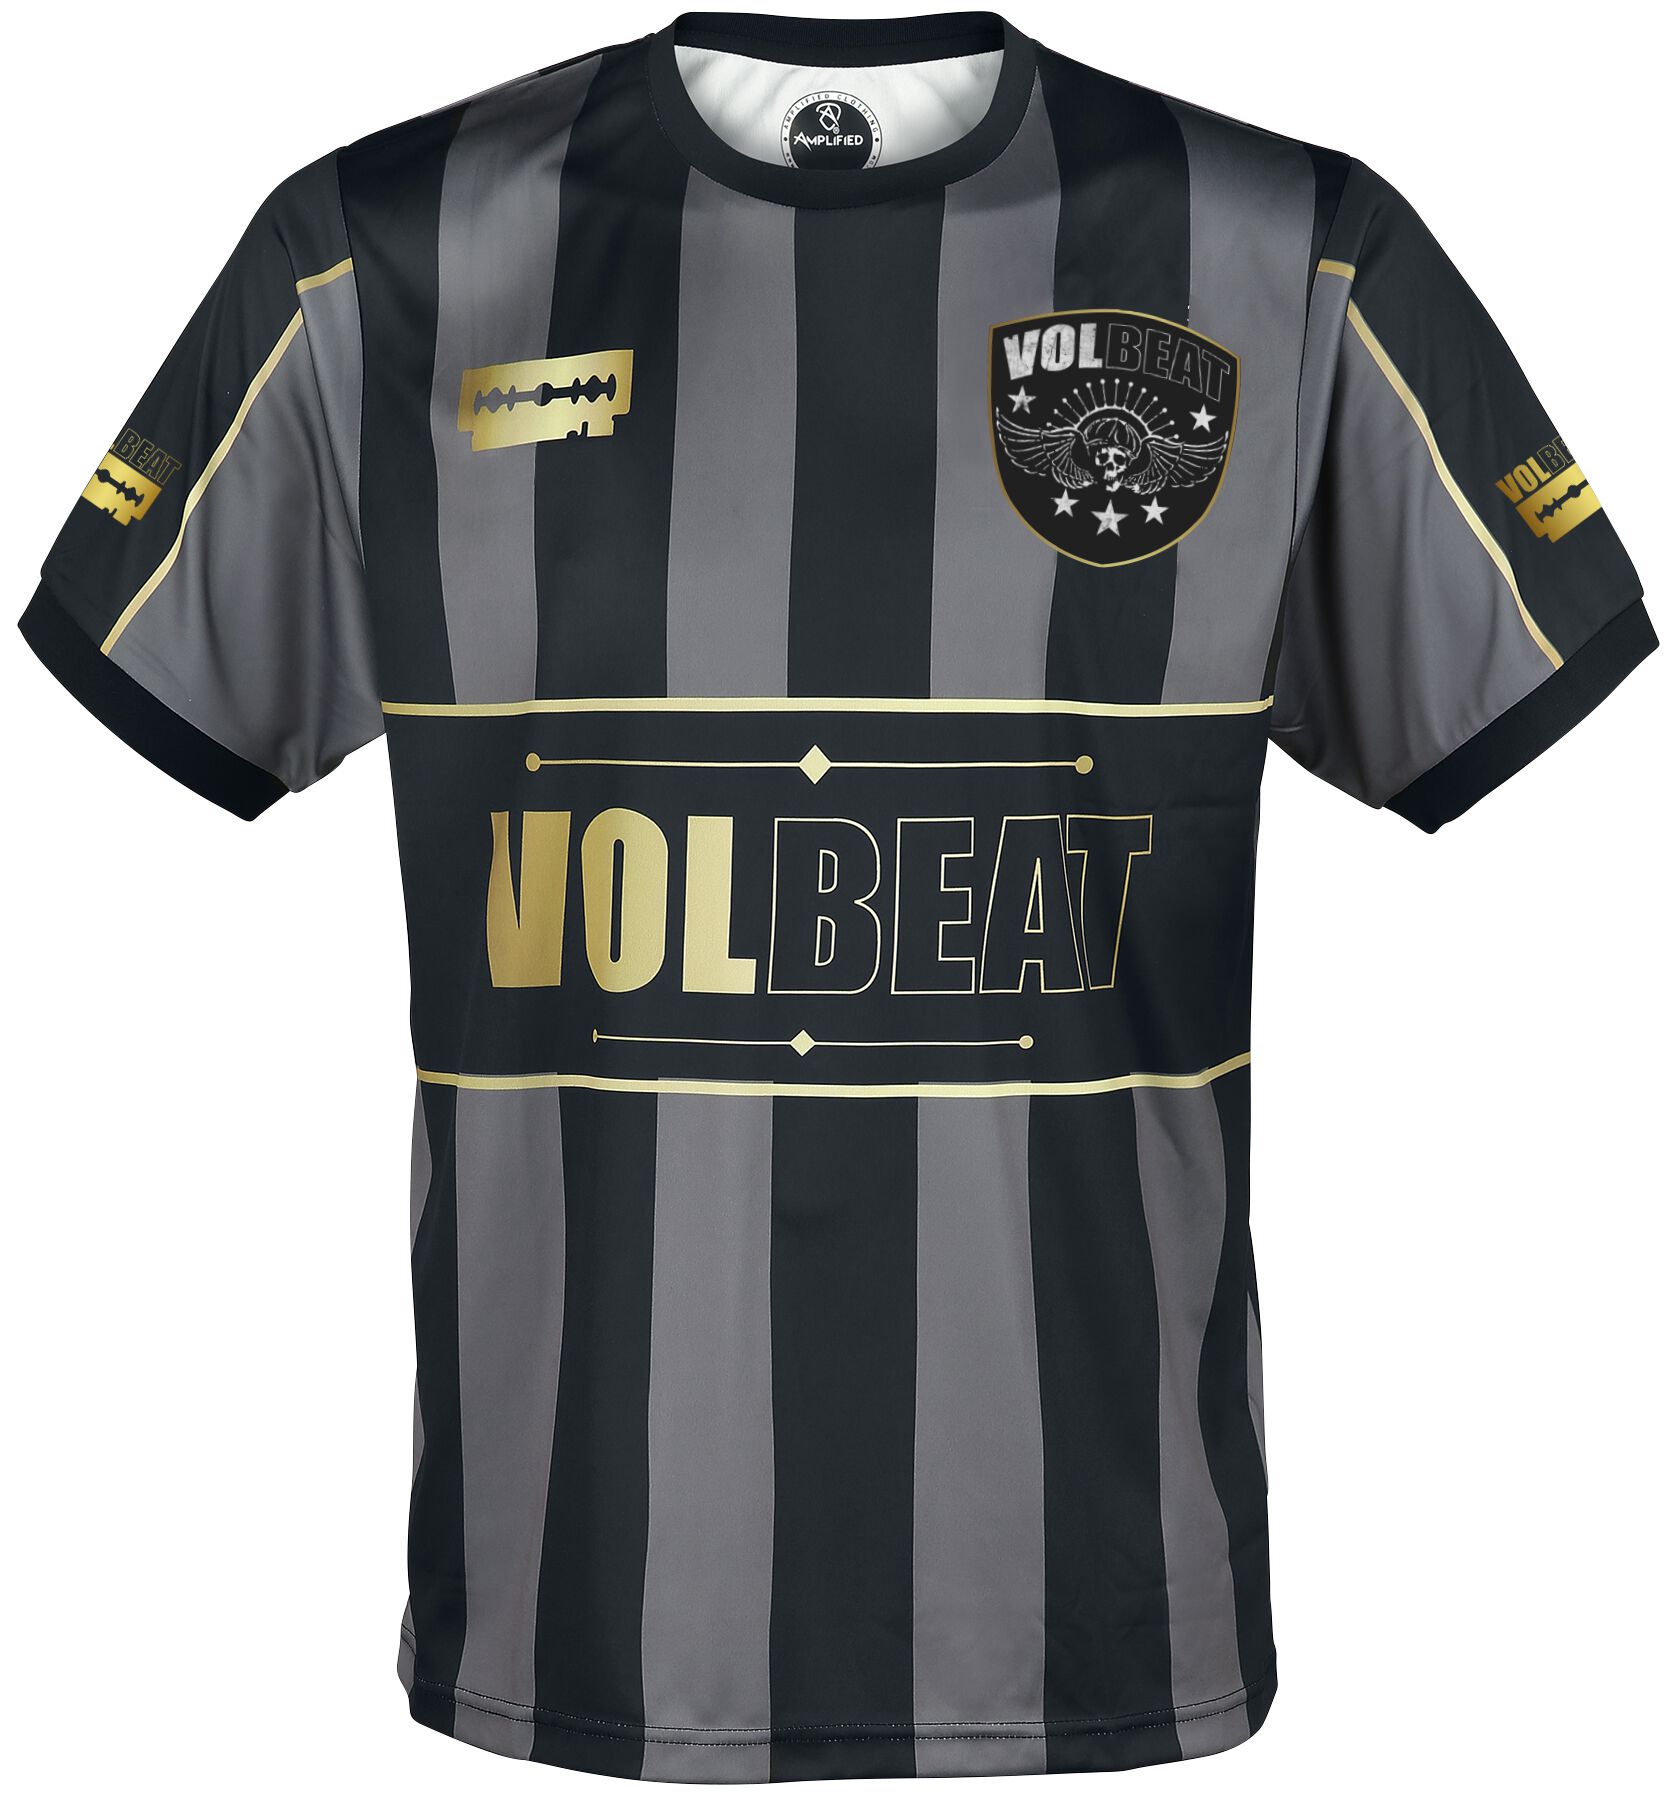 Volbeat Amplified Rock FC - Die To Live - Trikot Jersey multicolour